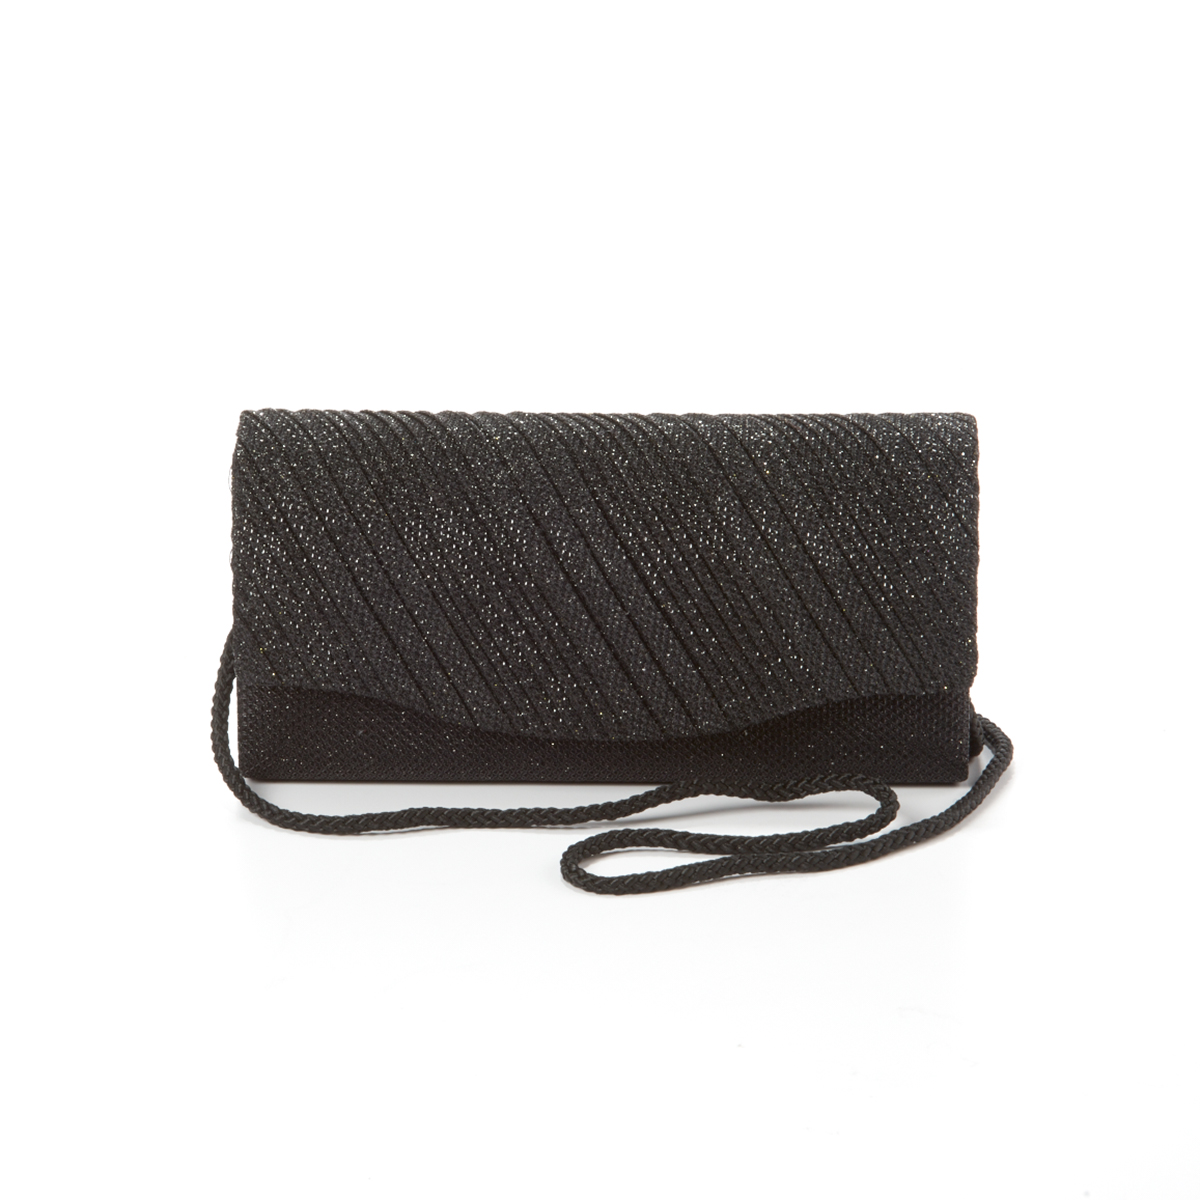 D'Margeaux Ribbed Glitter Evening Clutch